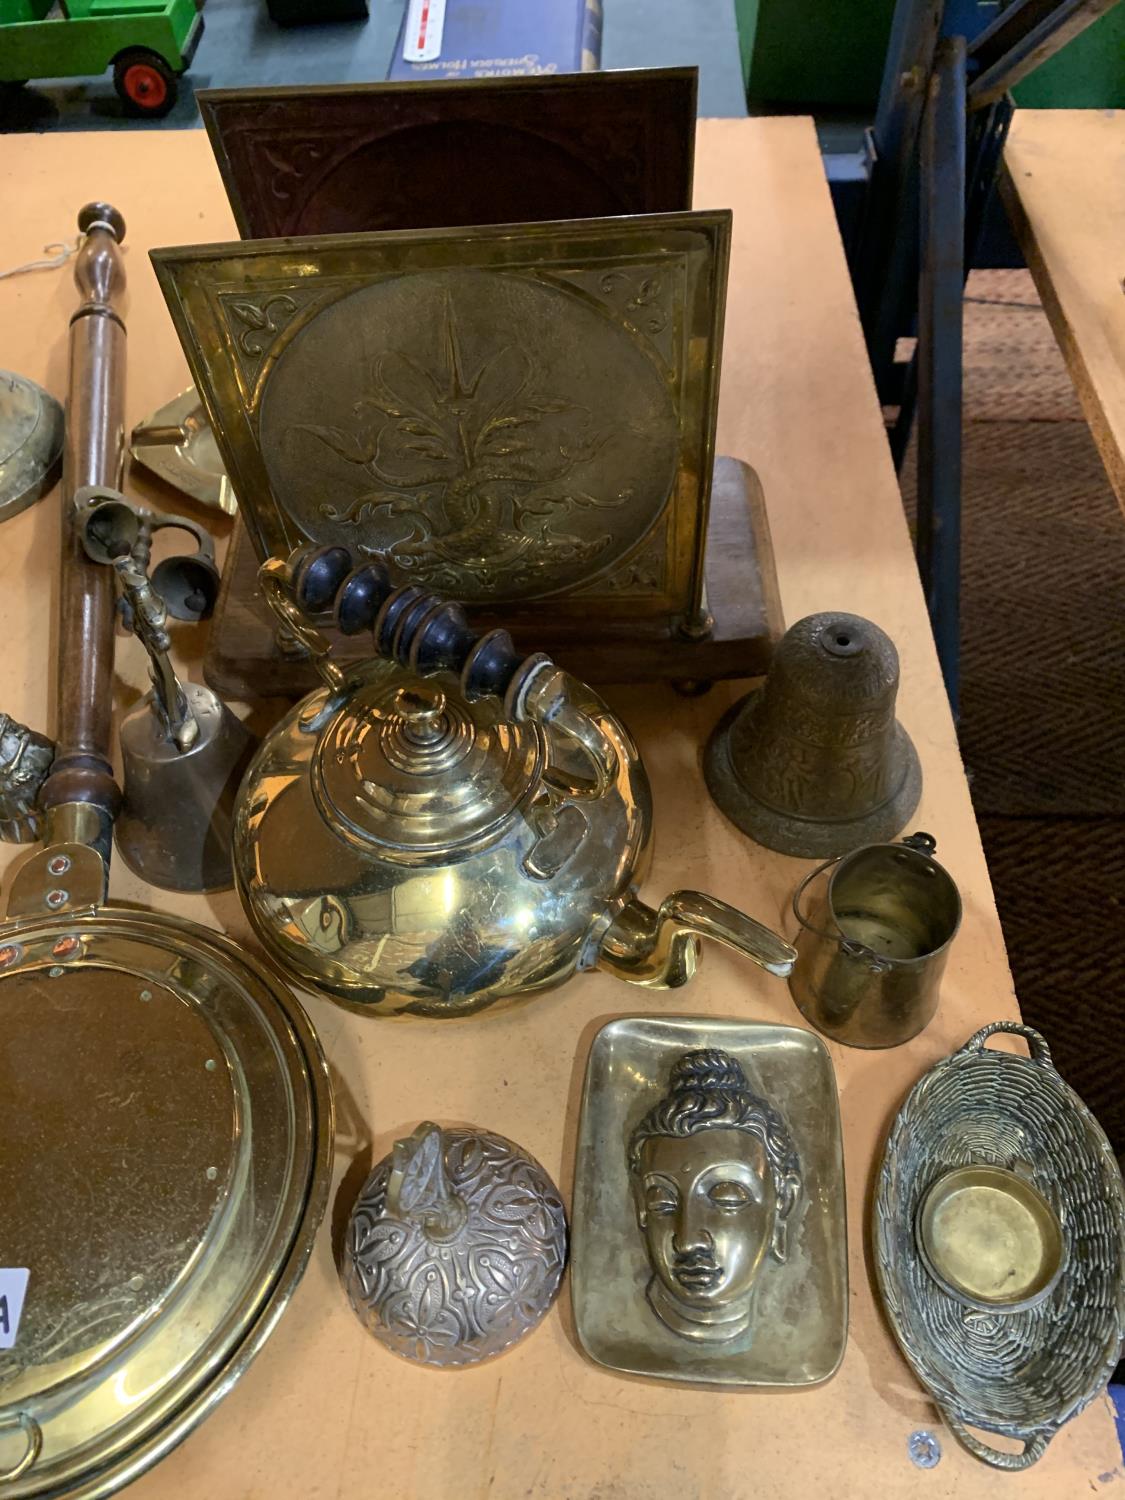 A LARGE QUANTITY OF BRASSWARE TO INCLUDE A BELL, HORSE BRASSES, KETTLE, CANDLESTICKS, CANNON, LAMP - Image 6 of 12